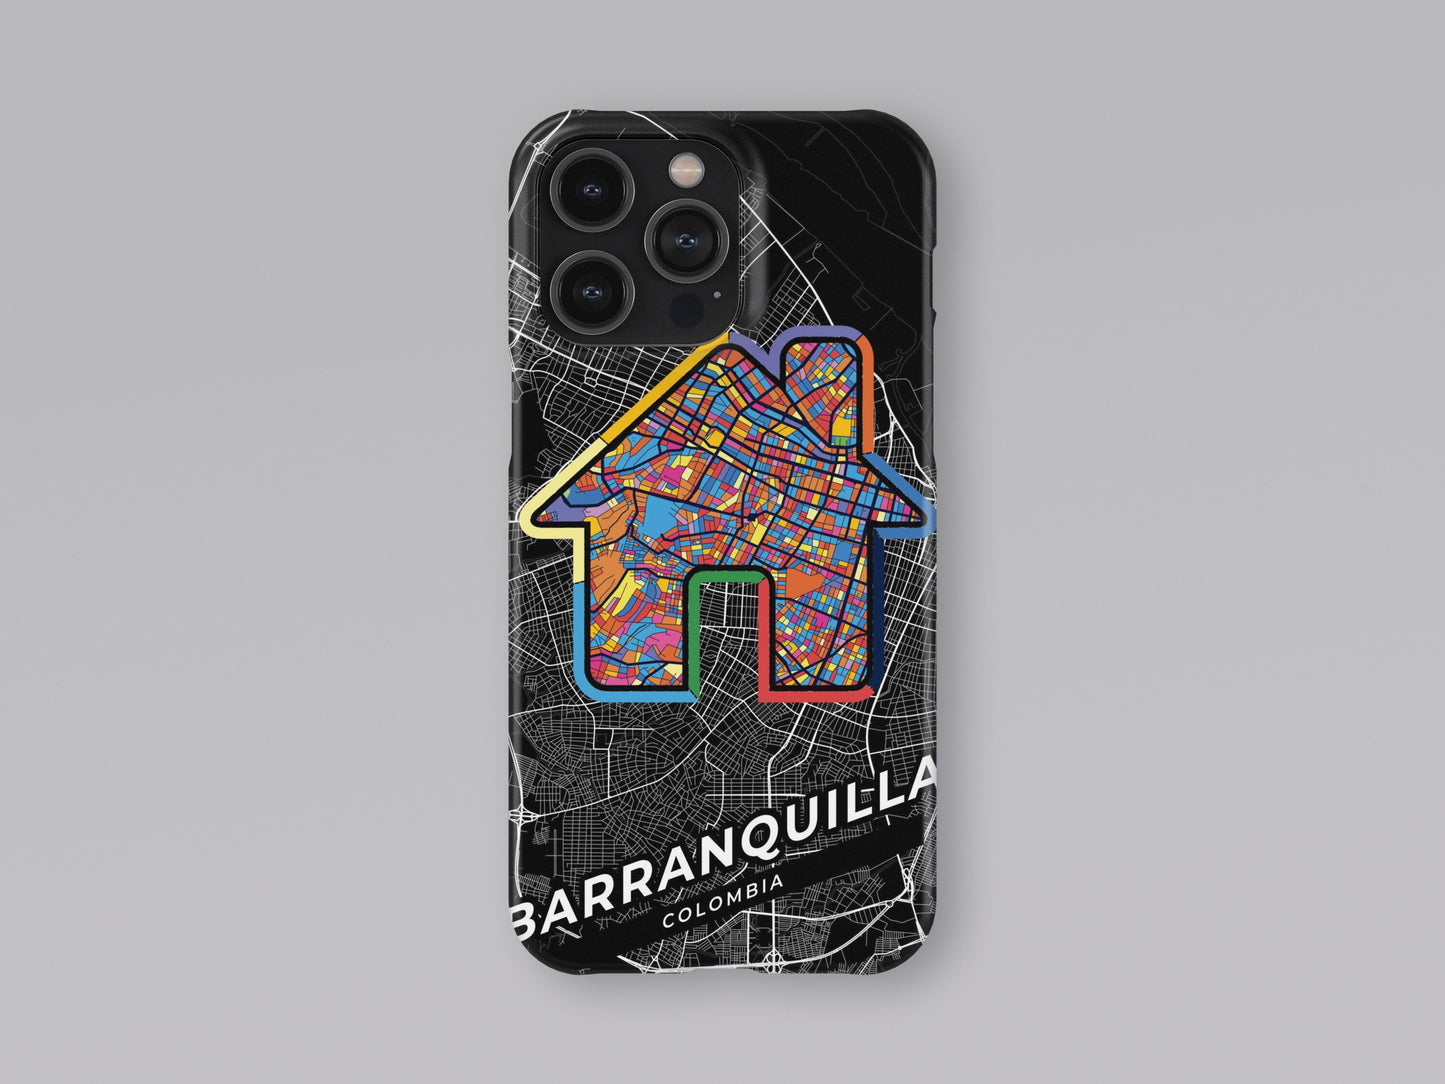 Barranquilla Colombia slim phone case with colorful icon. Birthday, wedding or housewarming gift. Couple match cases. 3